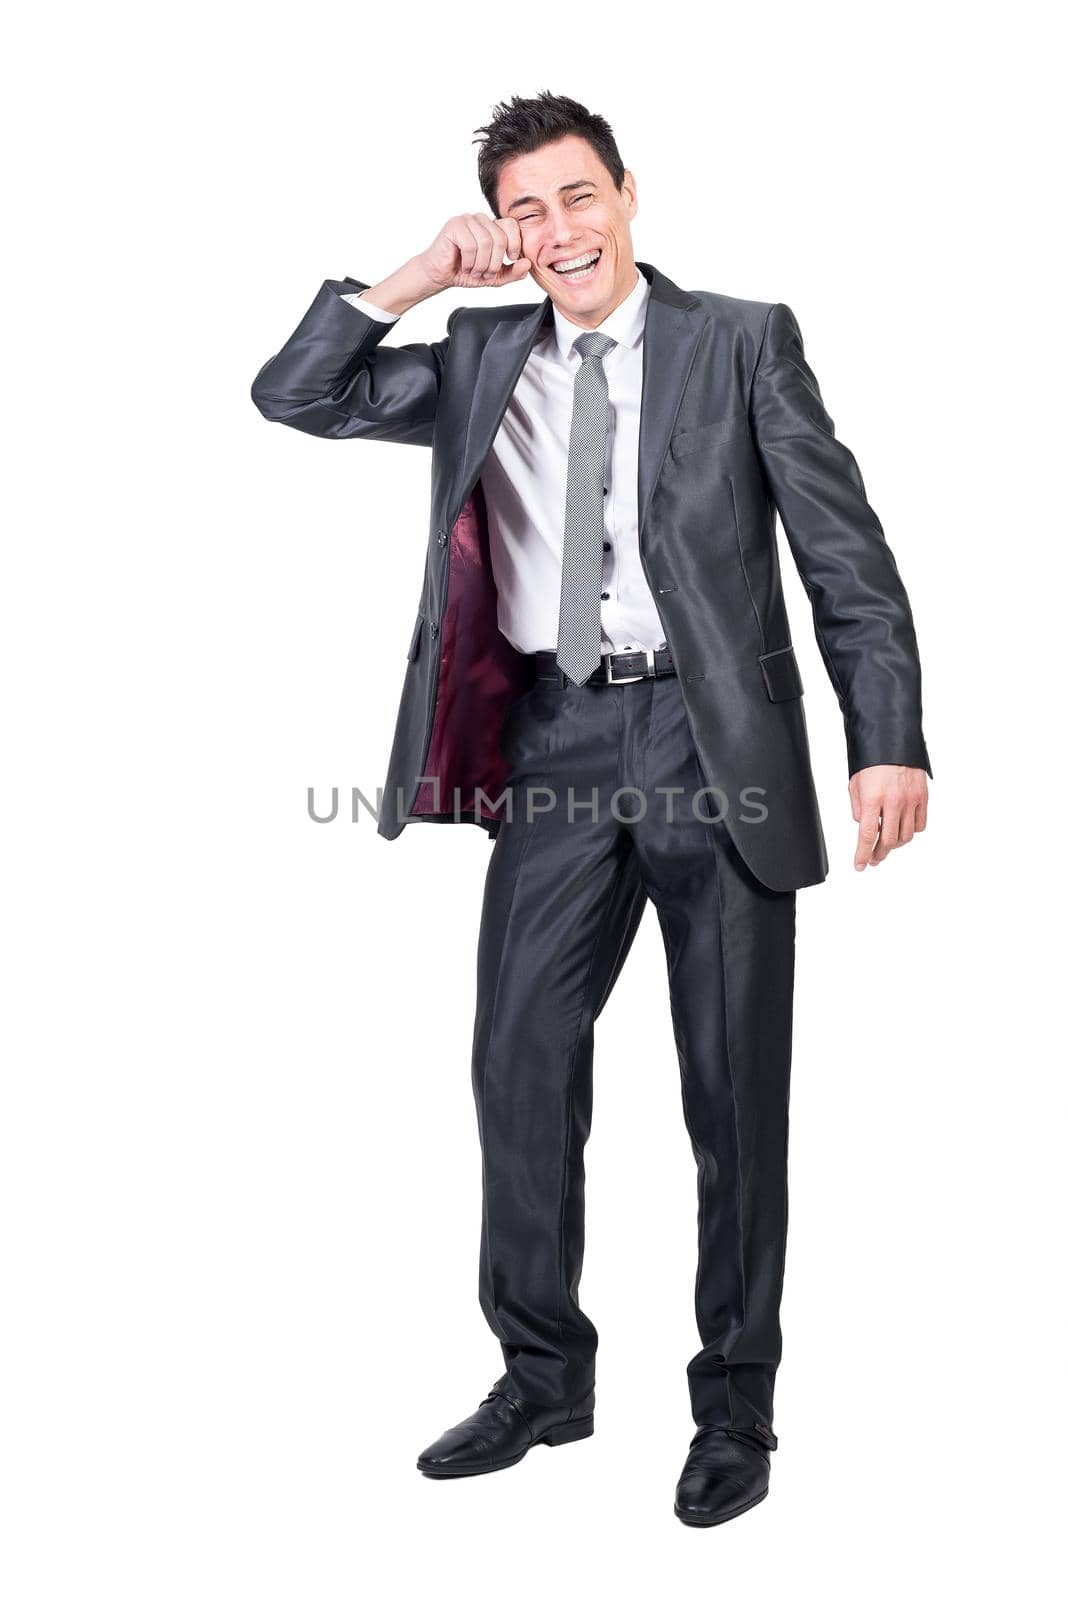 Full body of joyful man in formal suit laughing on funny joke and wiping tears from face in studio against white background